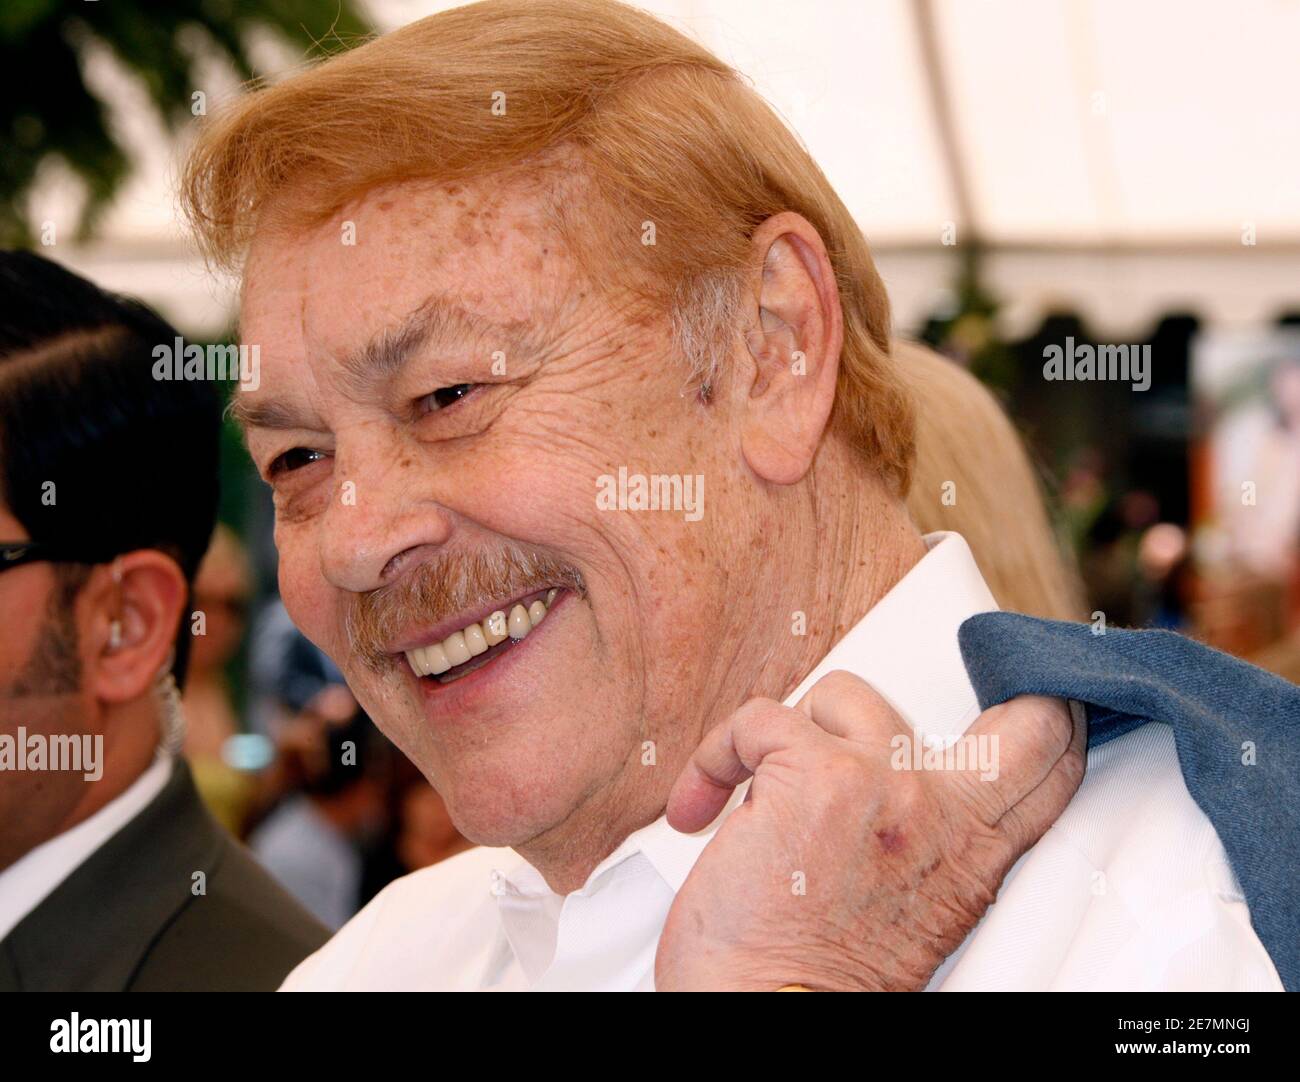 Jerry Buss, owner of the Los Angeles Lakers professional basketball team, attends a party honoring Canadian Jayde Nicole, the 2008 Playboy Playmate of the Year at the Playboy Mansion in Los Angeles California May 8, 2008.    REUTERS/Fred Prouser  (UNITED STATES) Stock Photo